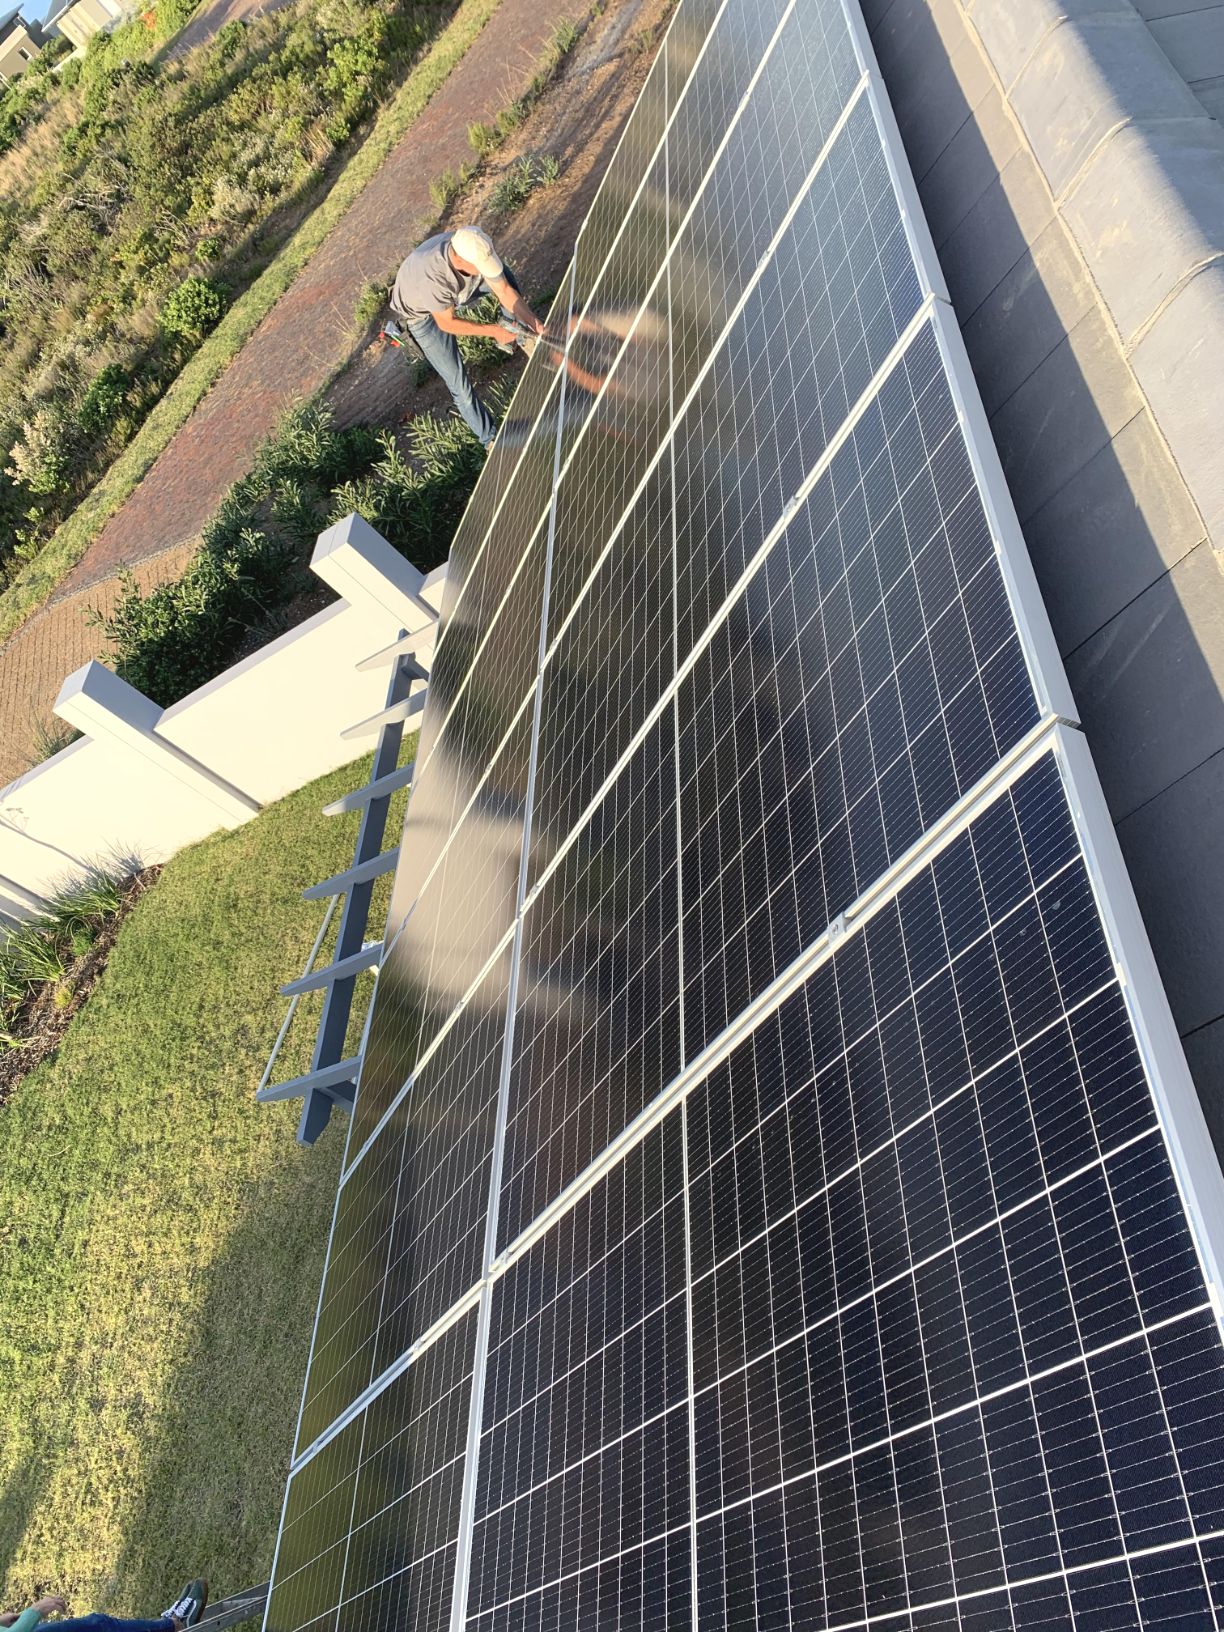 Final touches to 12 PV Panels